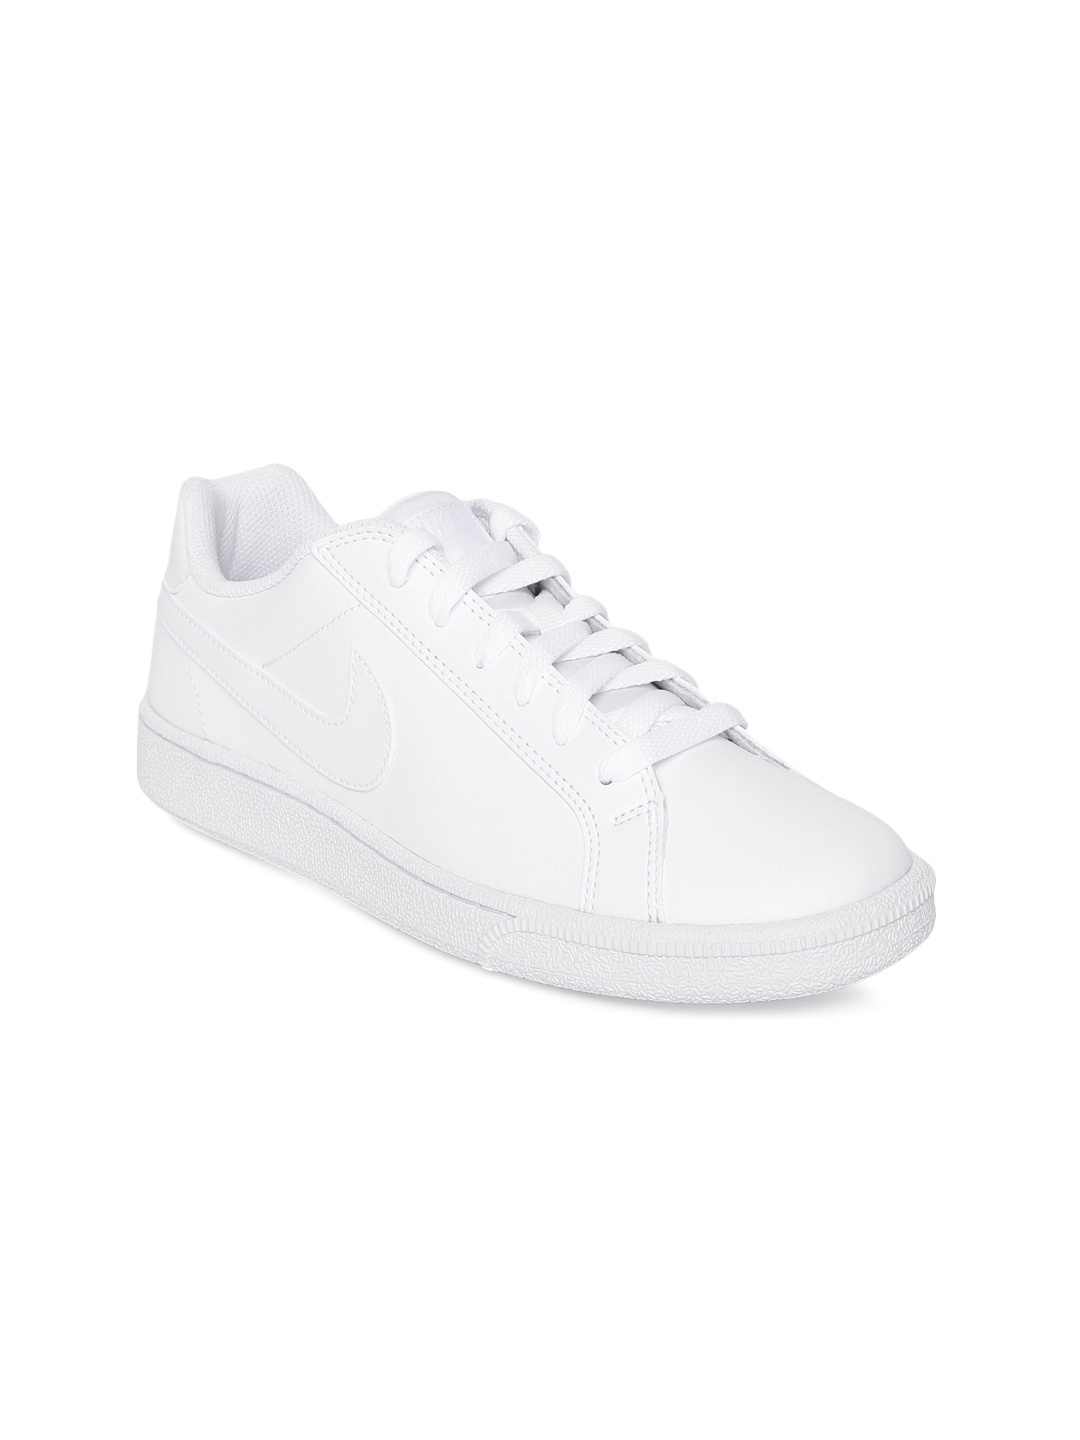 nike women's white leather sneakers